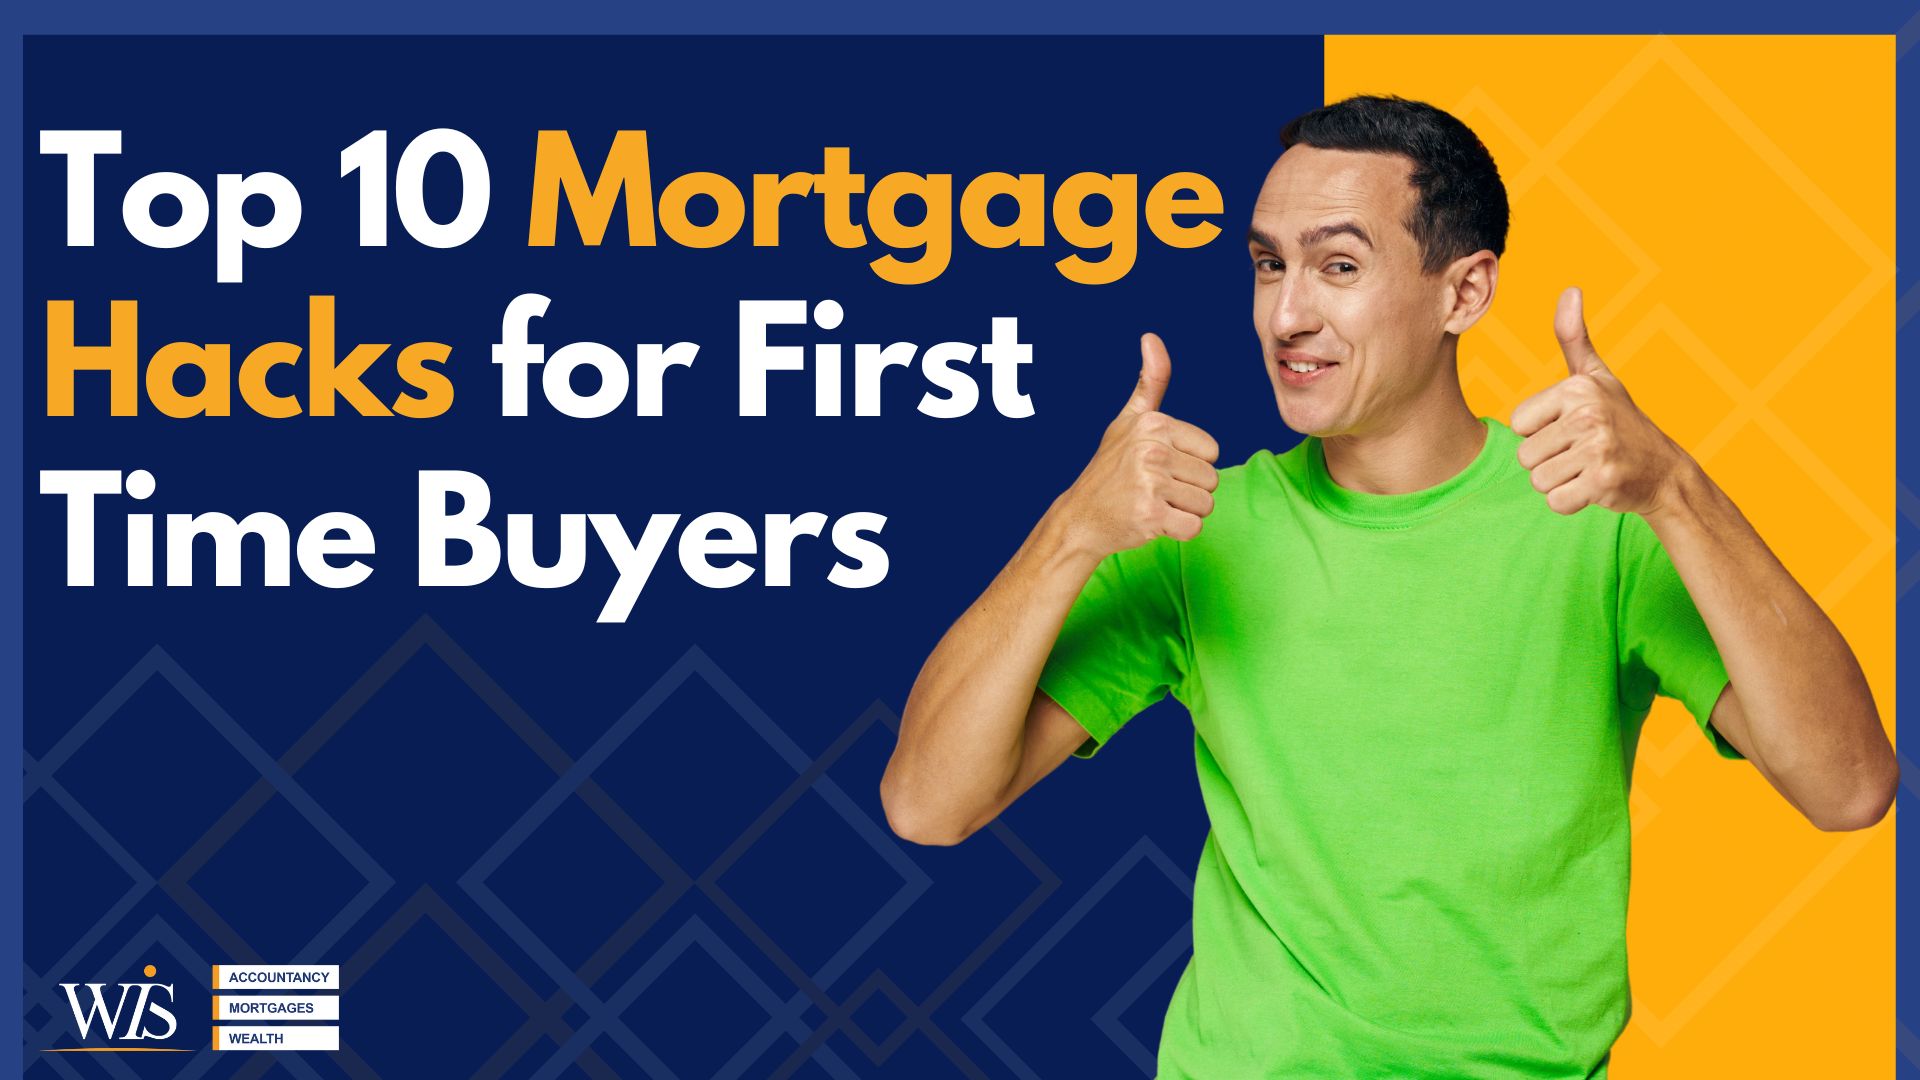 Top 10 mortgage hacks for first-time buyers image